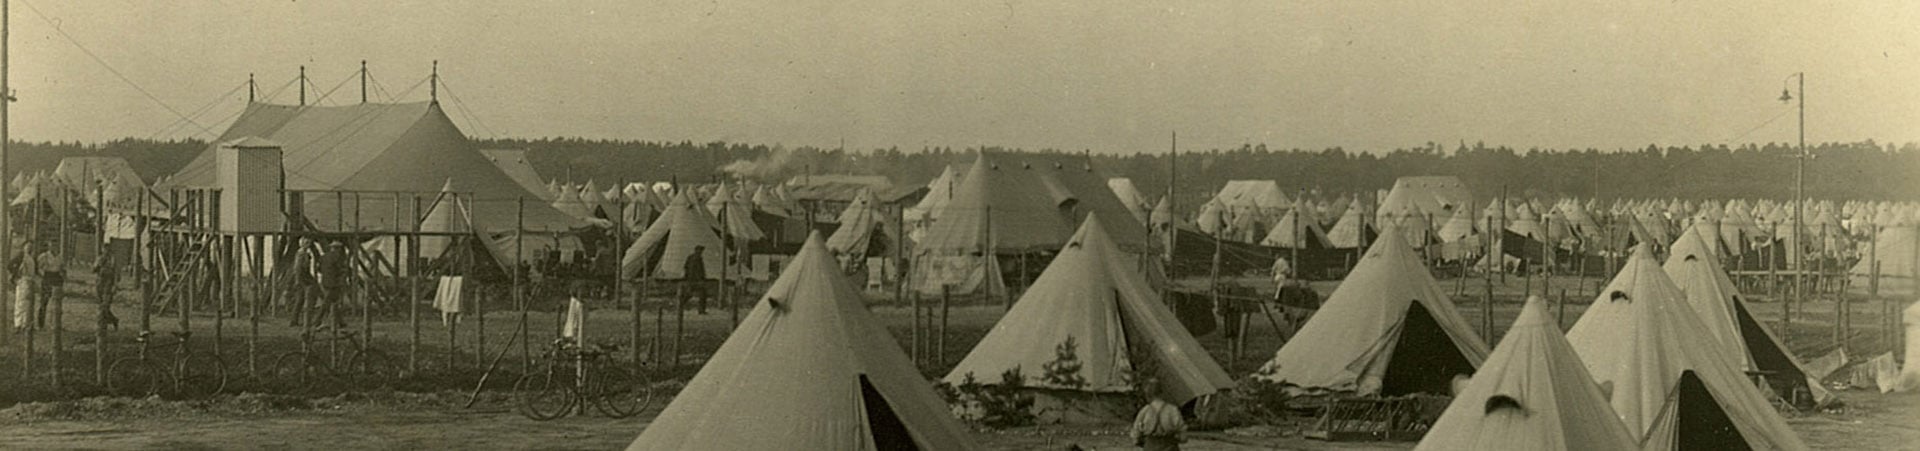 First World War Prisoner of War camp housed in canvas bell tents and large communal tents.